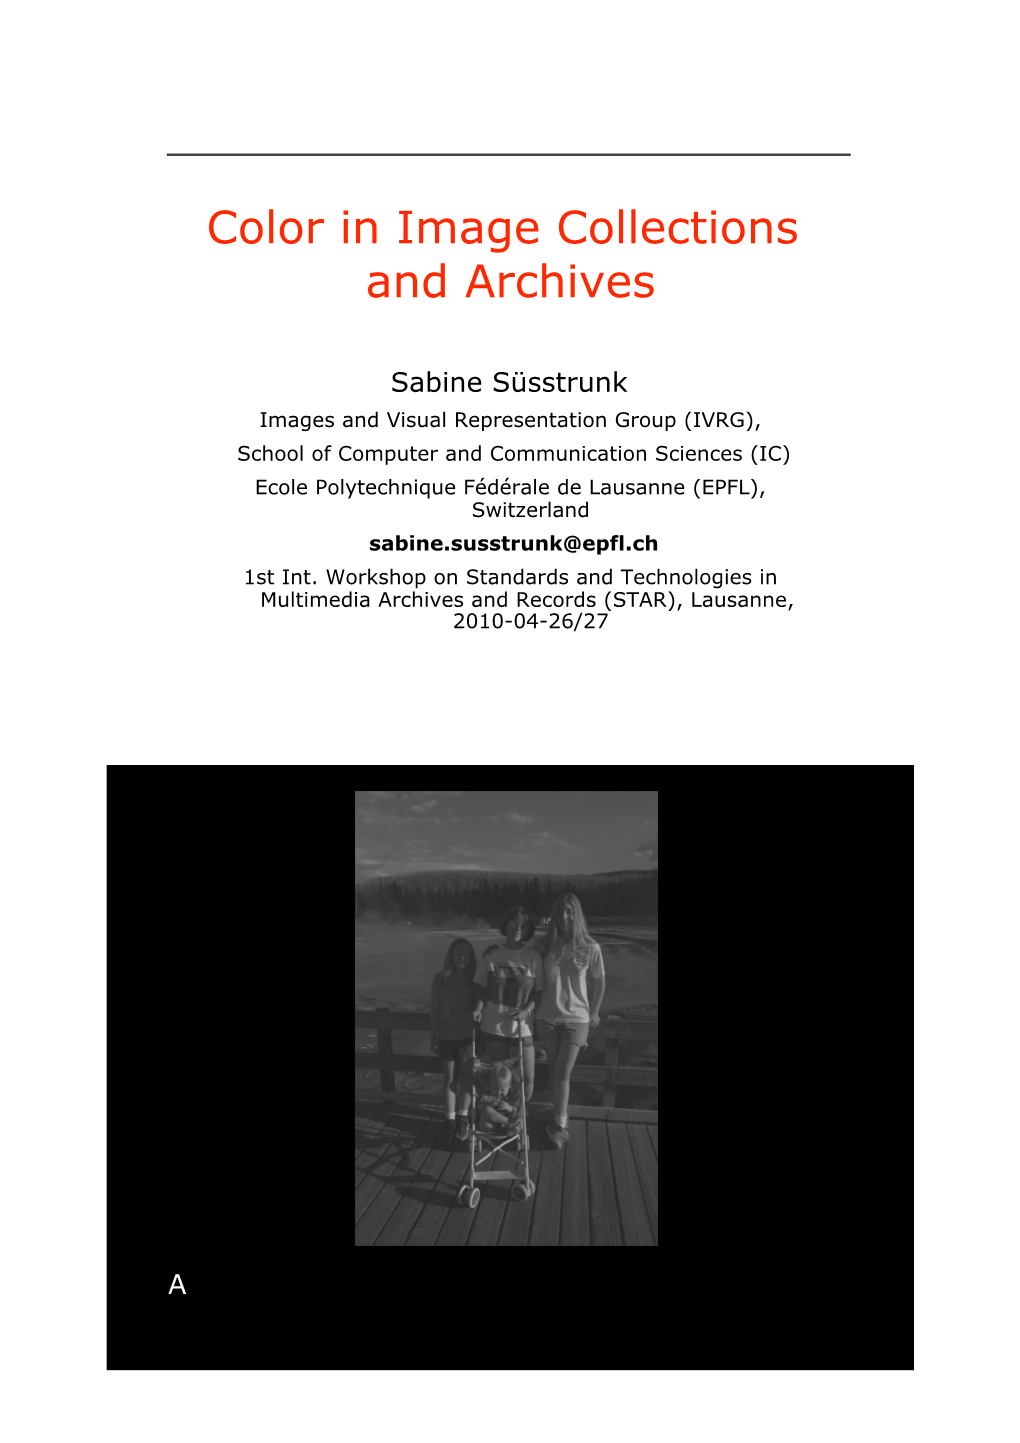 Color in Image Collections and Archives